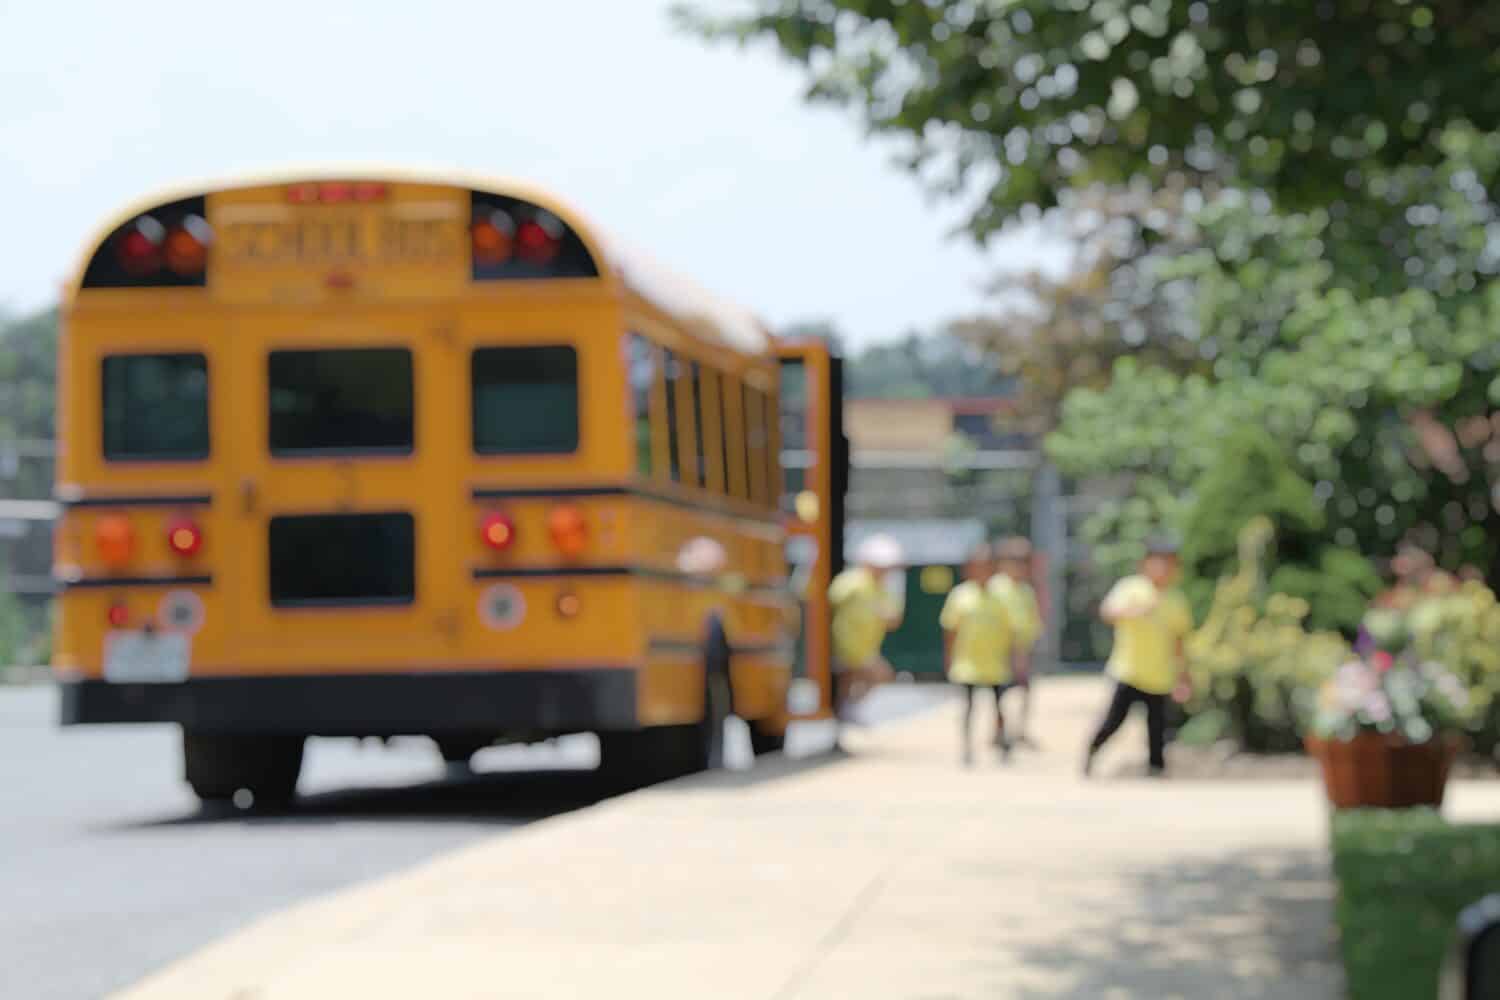 BLUR IMAGE OF YELLOW SCHOOL BUS WITH YOUNG CHILDREN, MARYLAND, USA